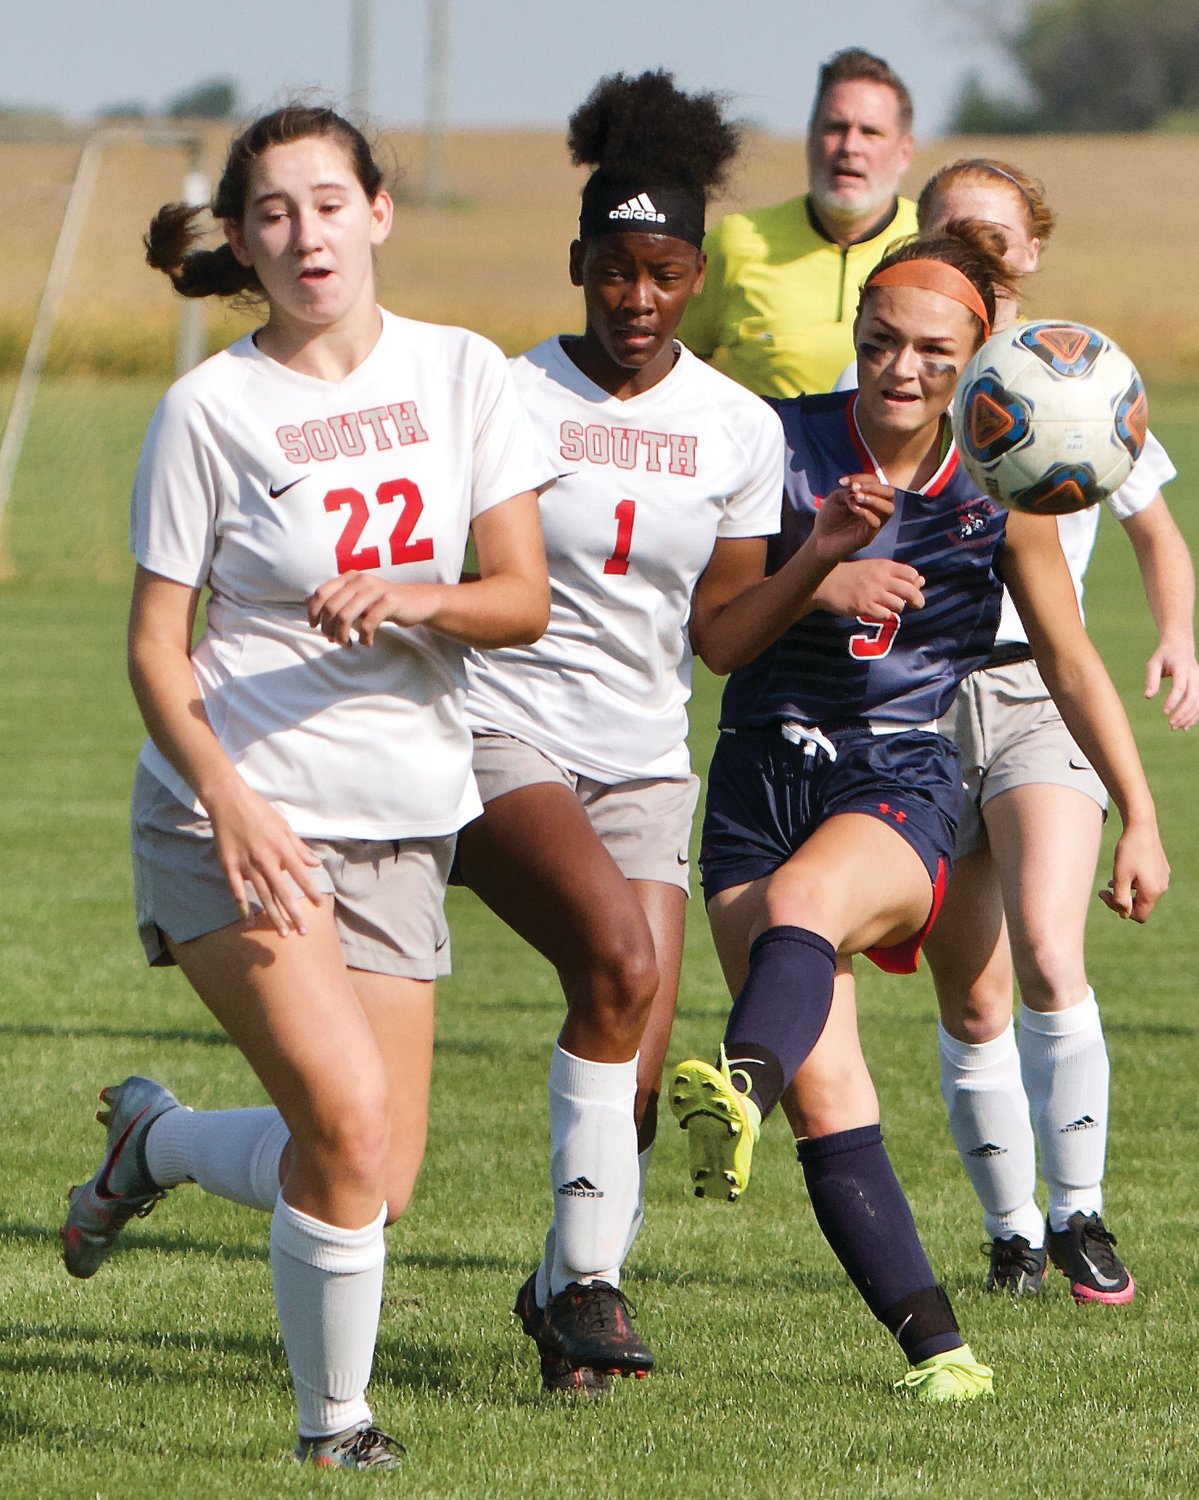 Southmont's Chloe Lynn, Shakhia Burks and North Montgomery's Teegan Bacon all fight for position.